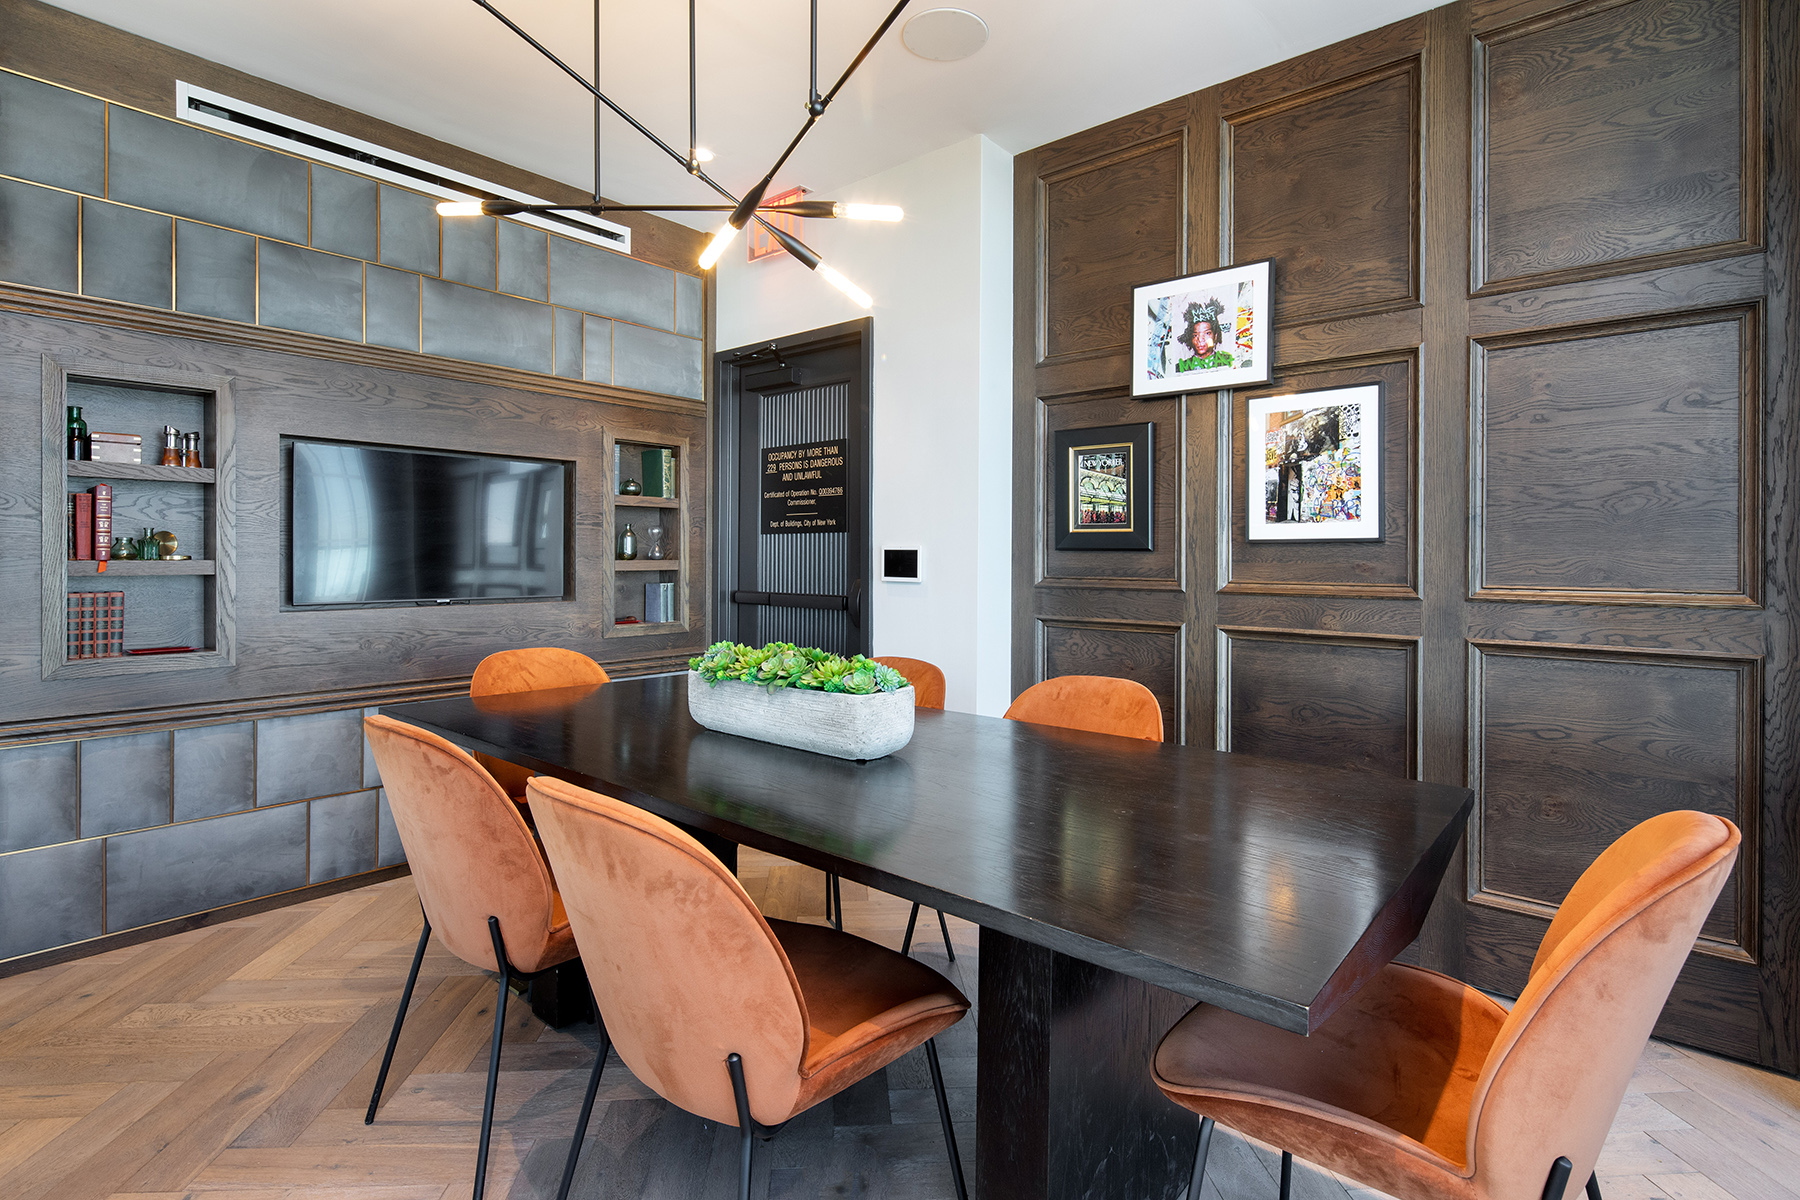 Private room with dark dining or conference table with contemporary chairs, built-in flat screen tv with shelving, modern lighting and wood floors